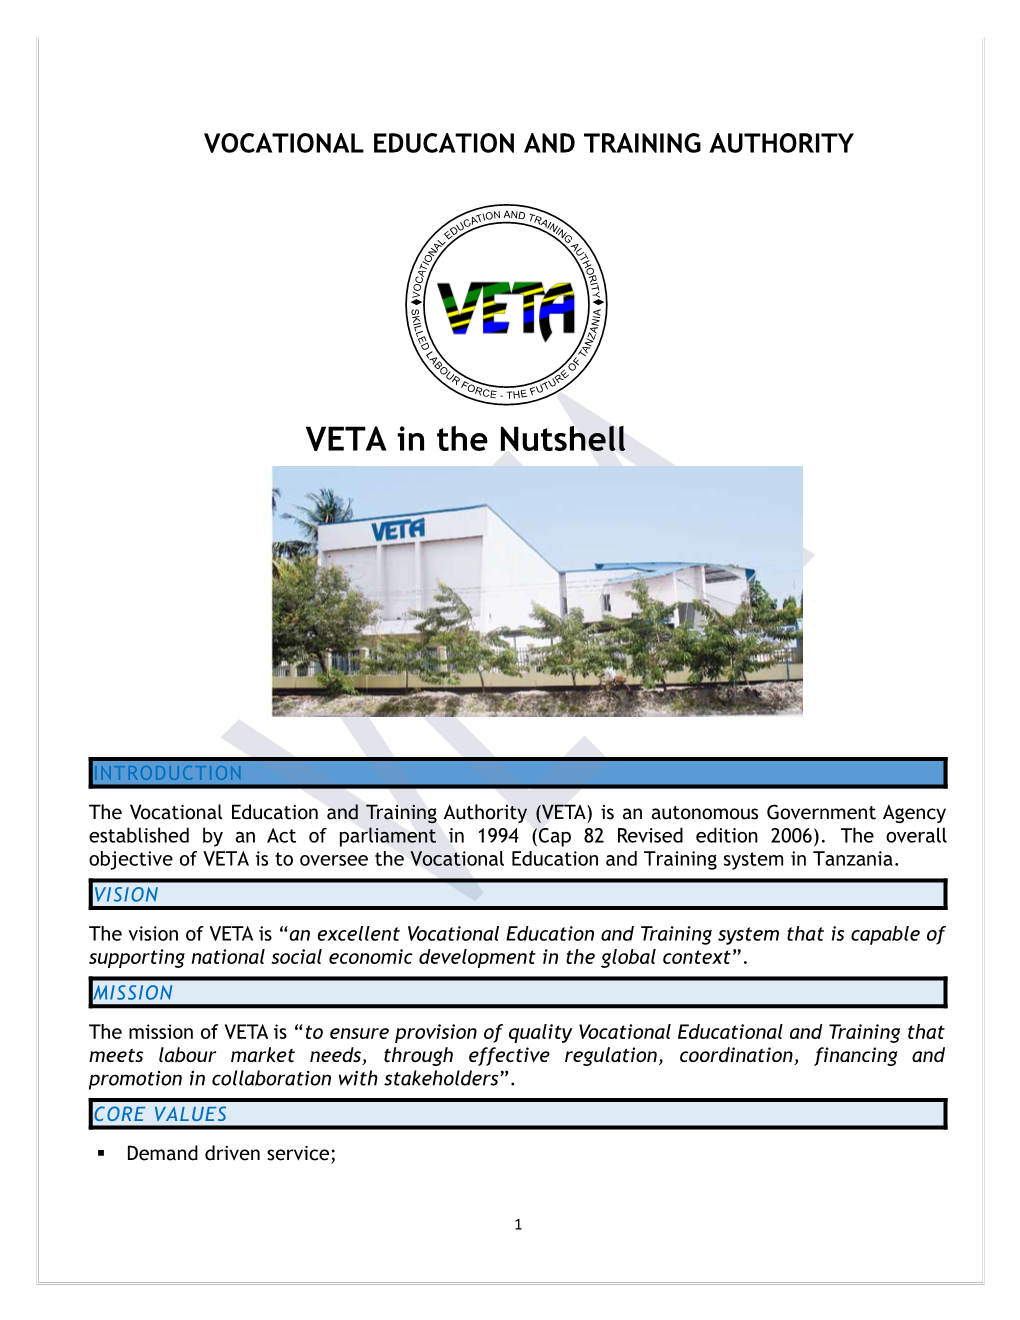 Vocational Education and Training Authority